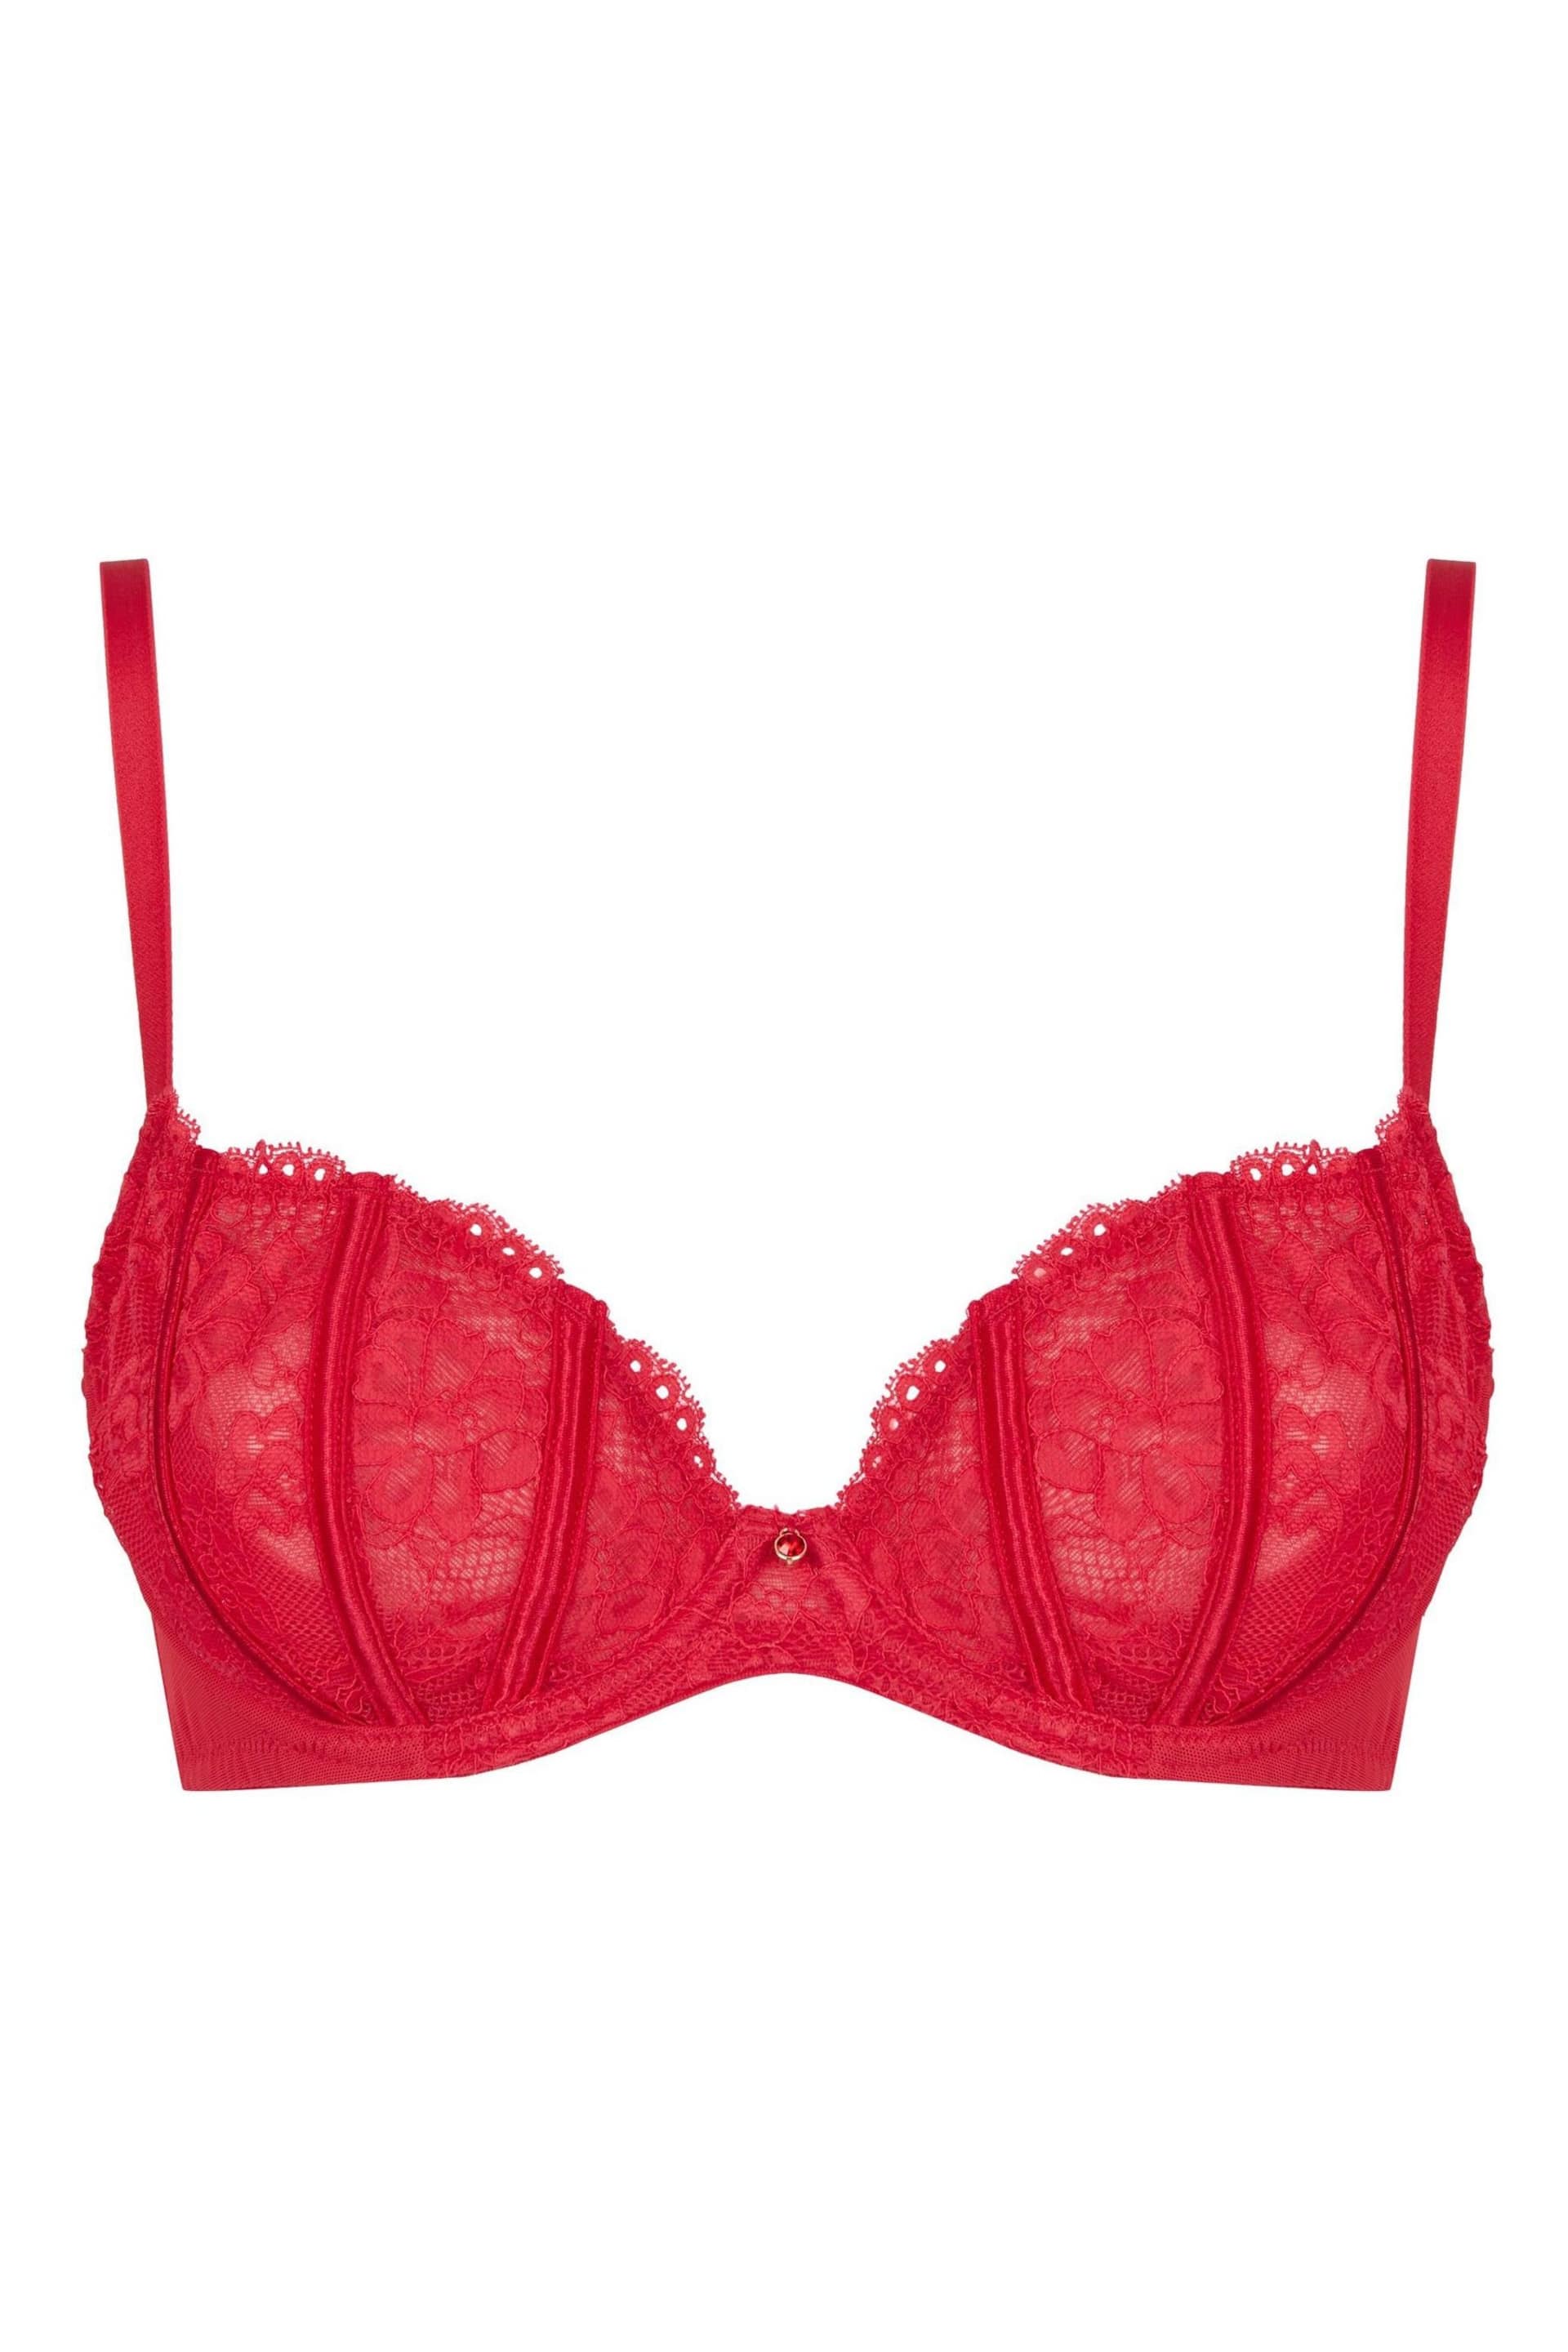 Ann Summers Red Sexy Lace Planet Non Pad Plunge Bra - Image 5 of 5